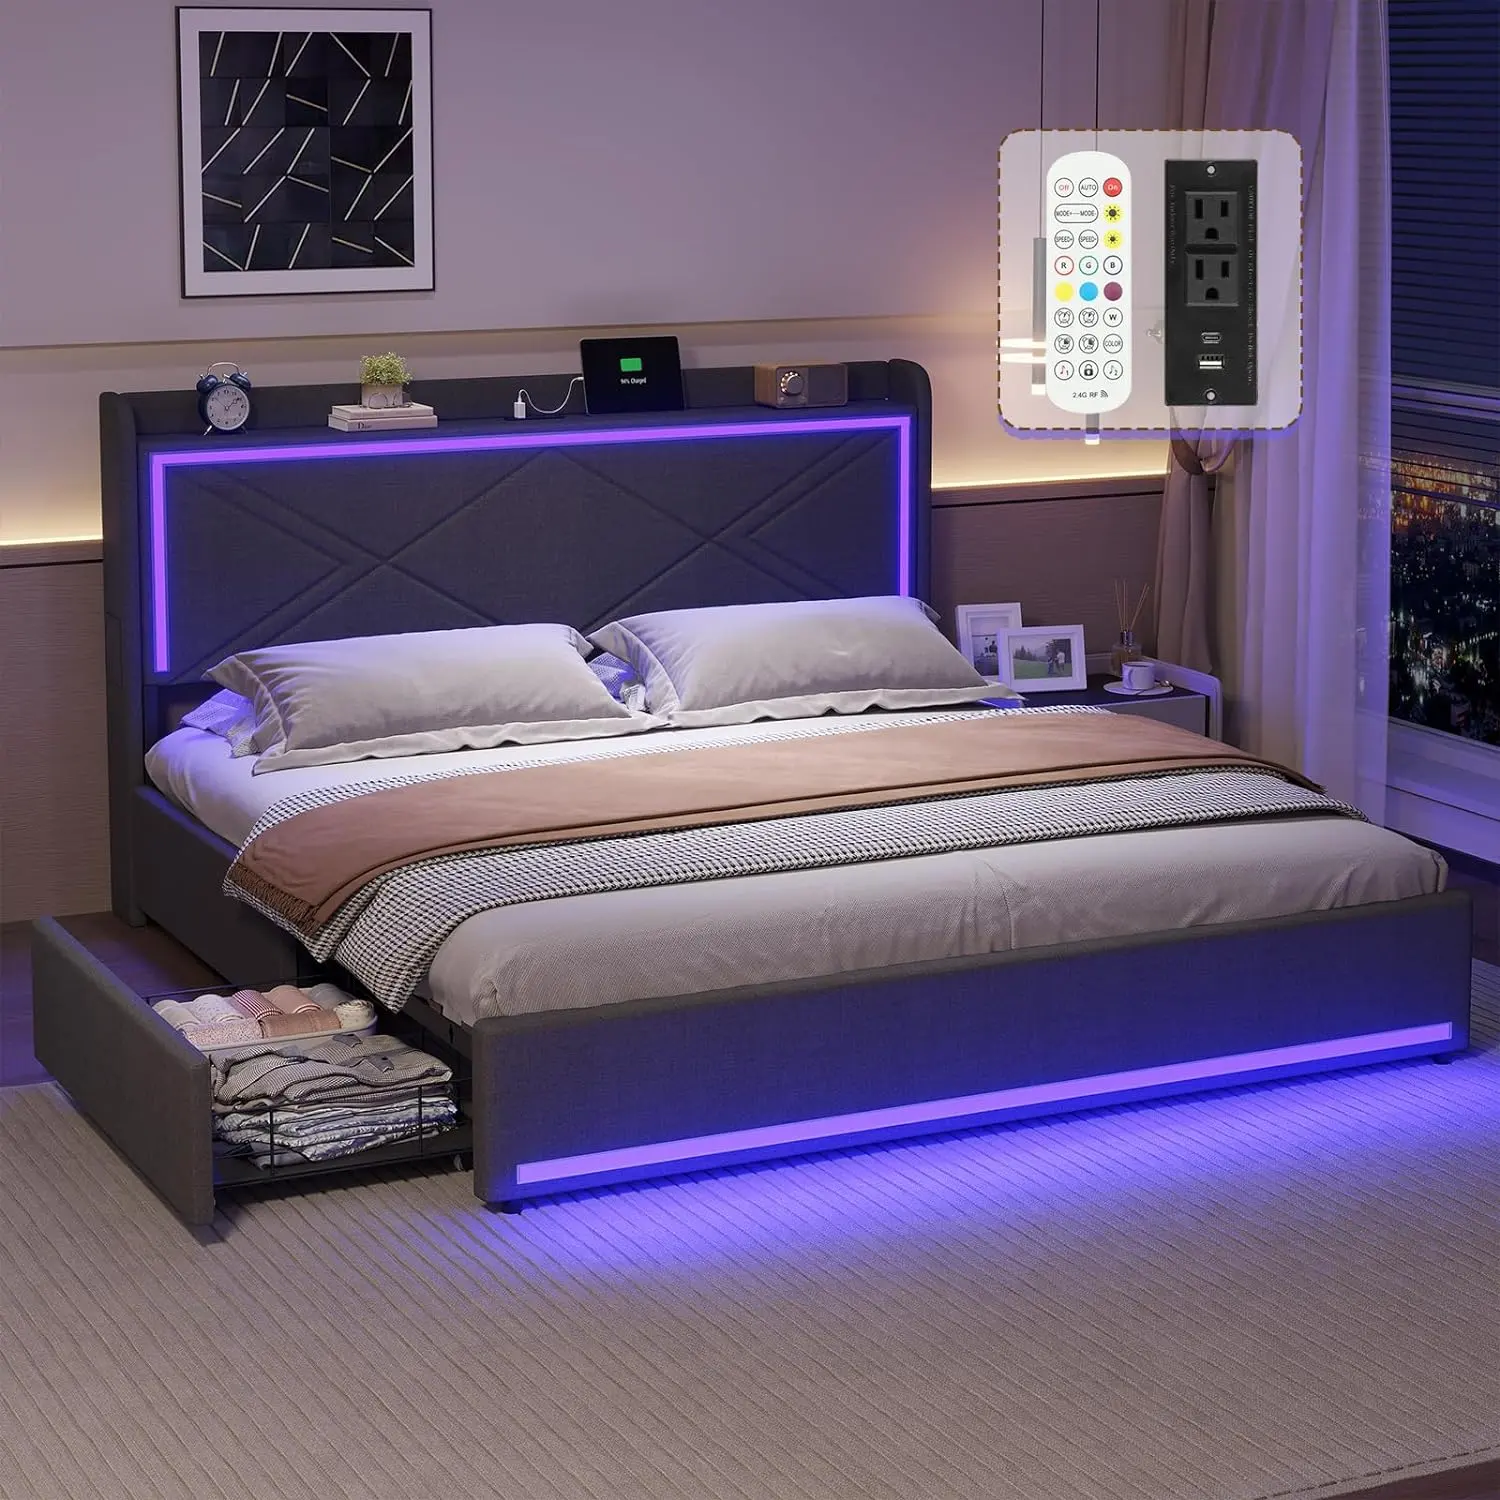 Led lights king size modern bed with drawers wooden bed